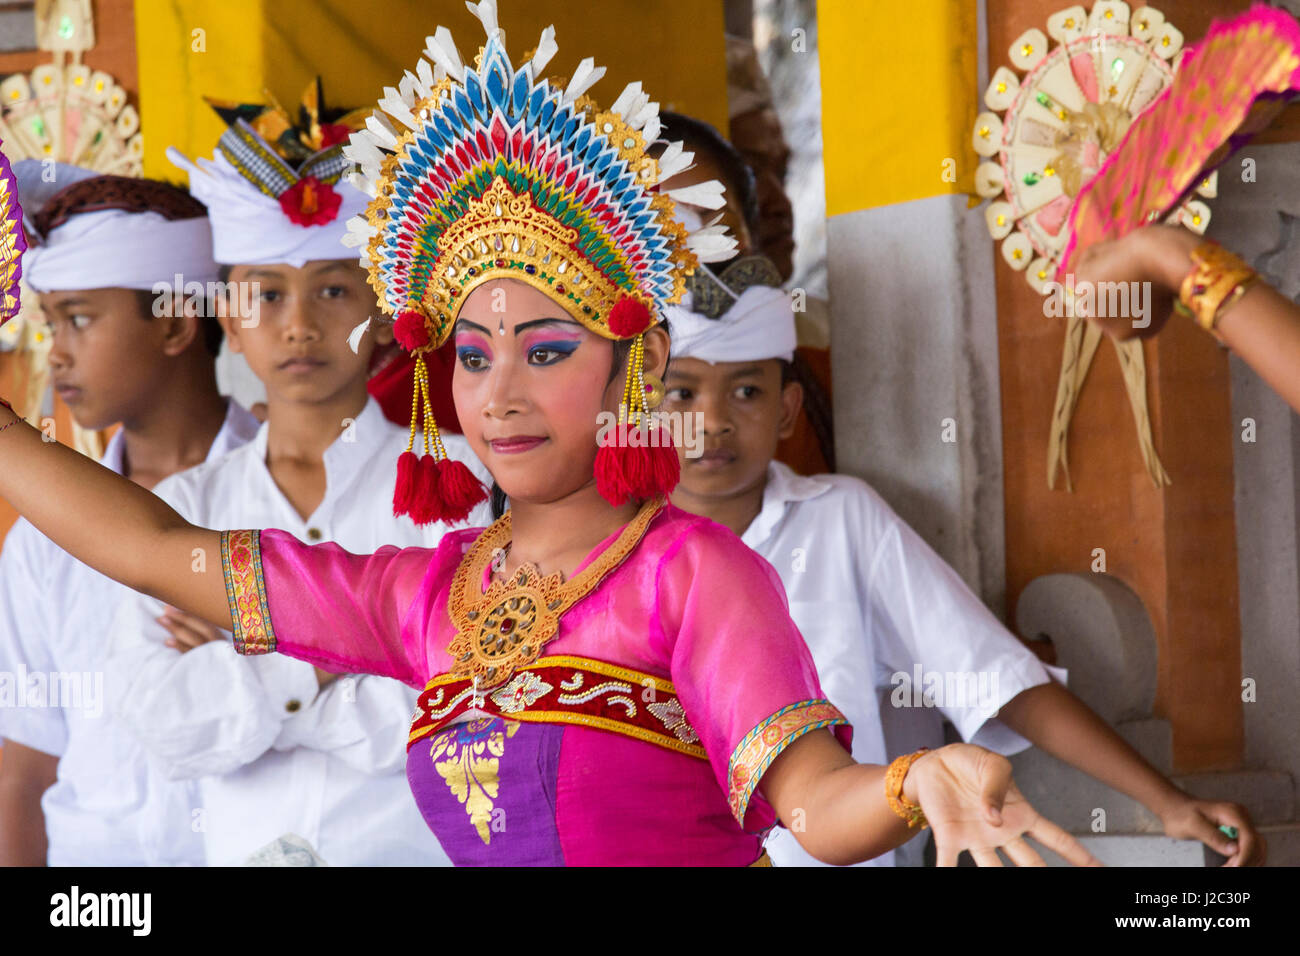 Indonesia, Bali. Dressed in Traditional Dancing Costume, Legong Dancer with Frangipani floral headdress, being watched by younger participants. (Editorial Use Only) Stock Photo